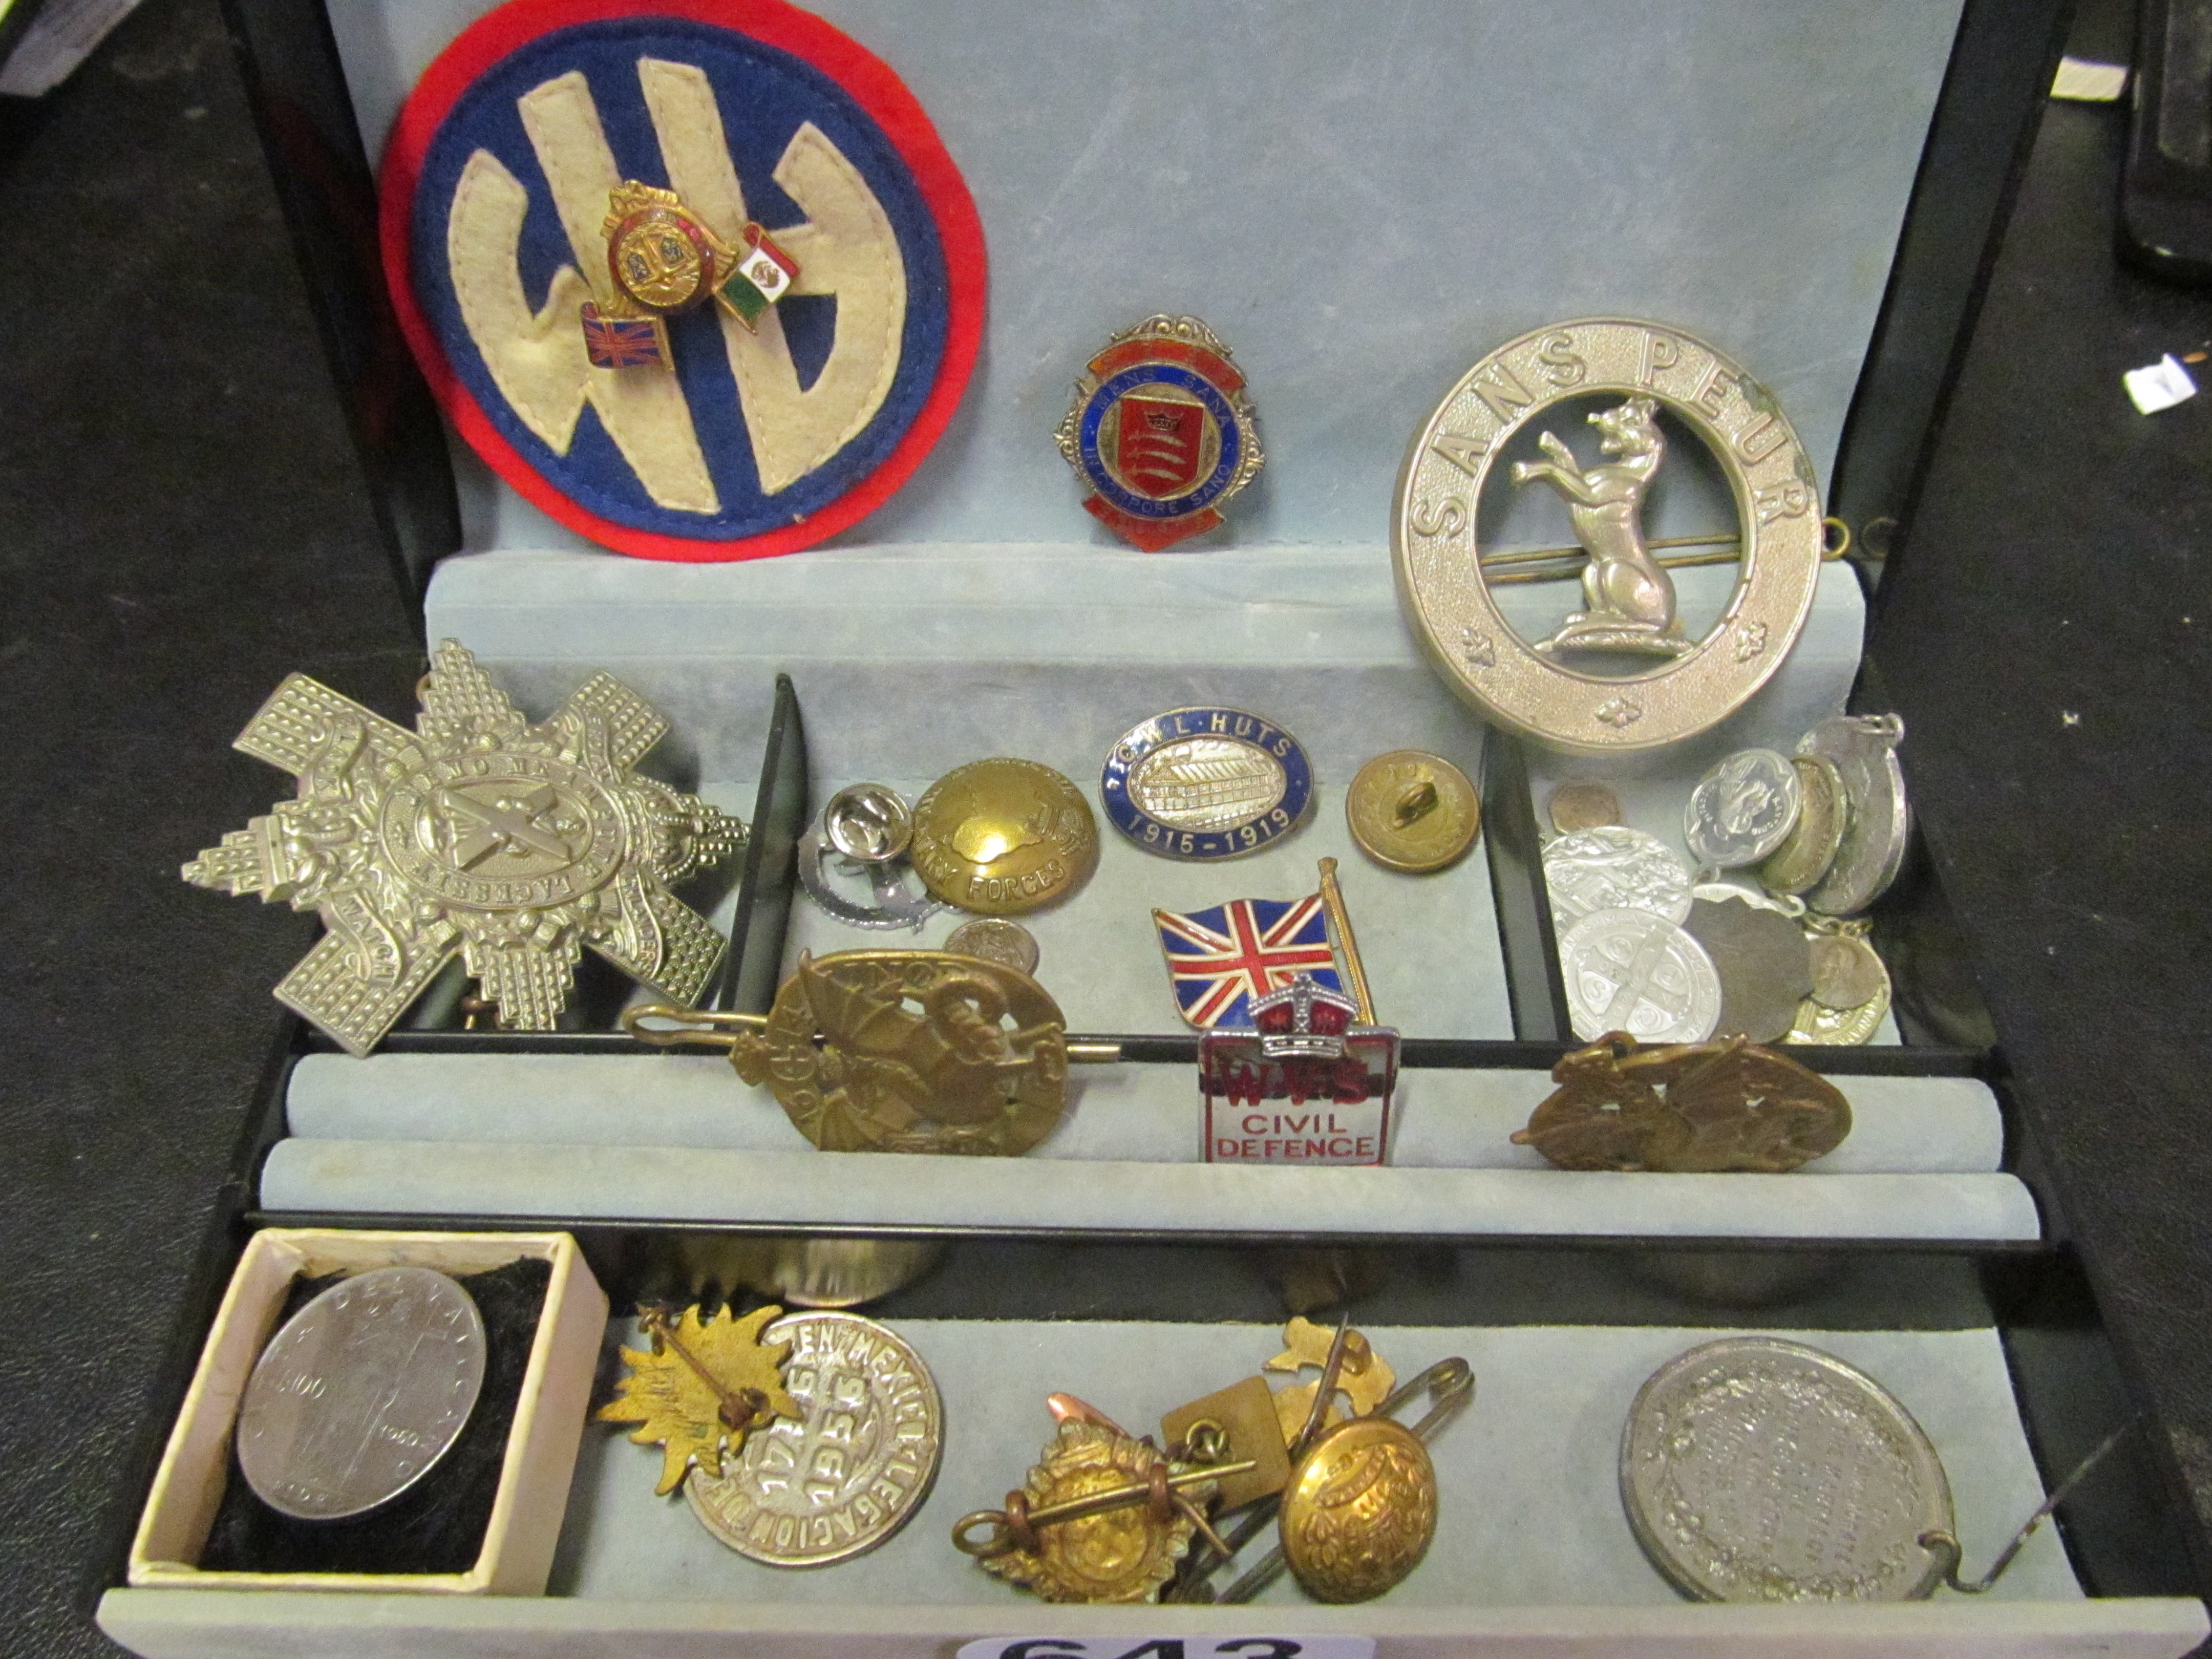 A Baden Powell medal, silver medal, other coins etc